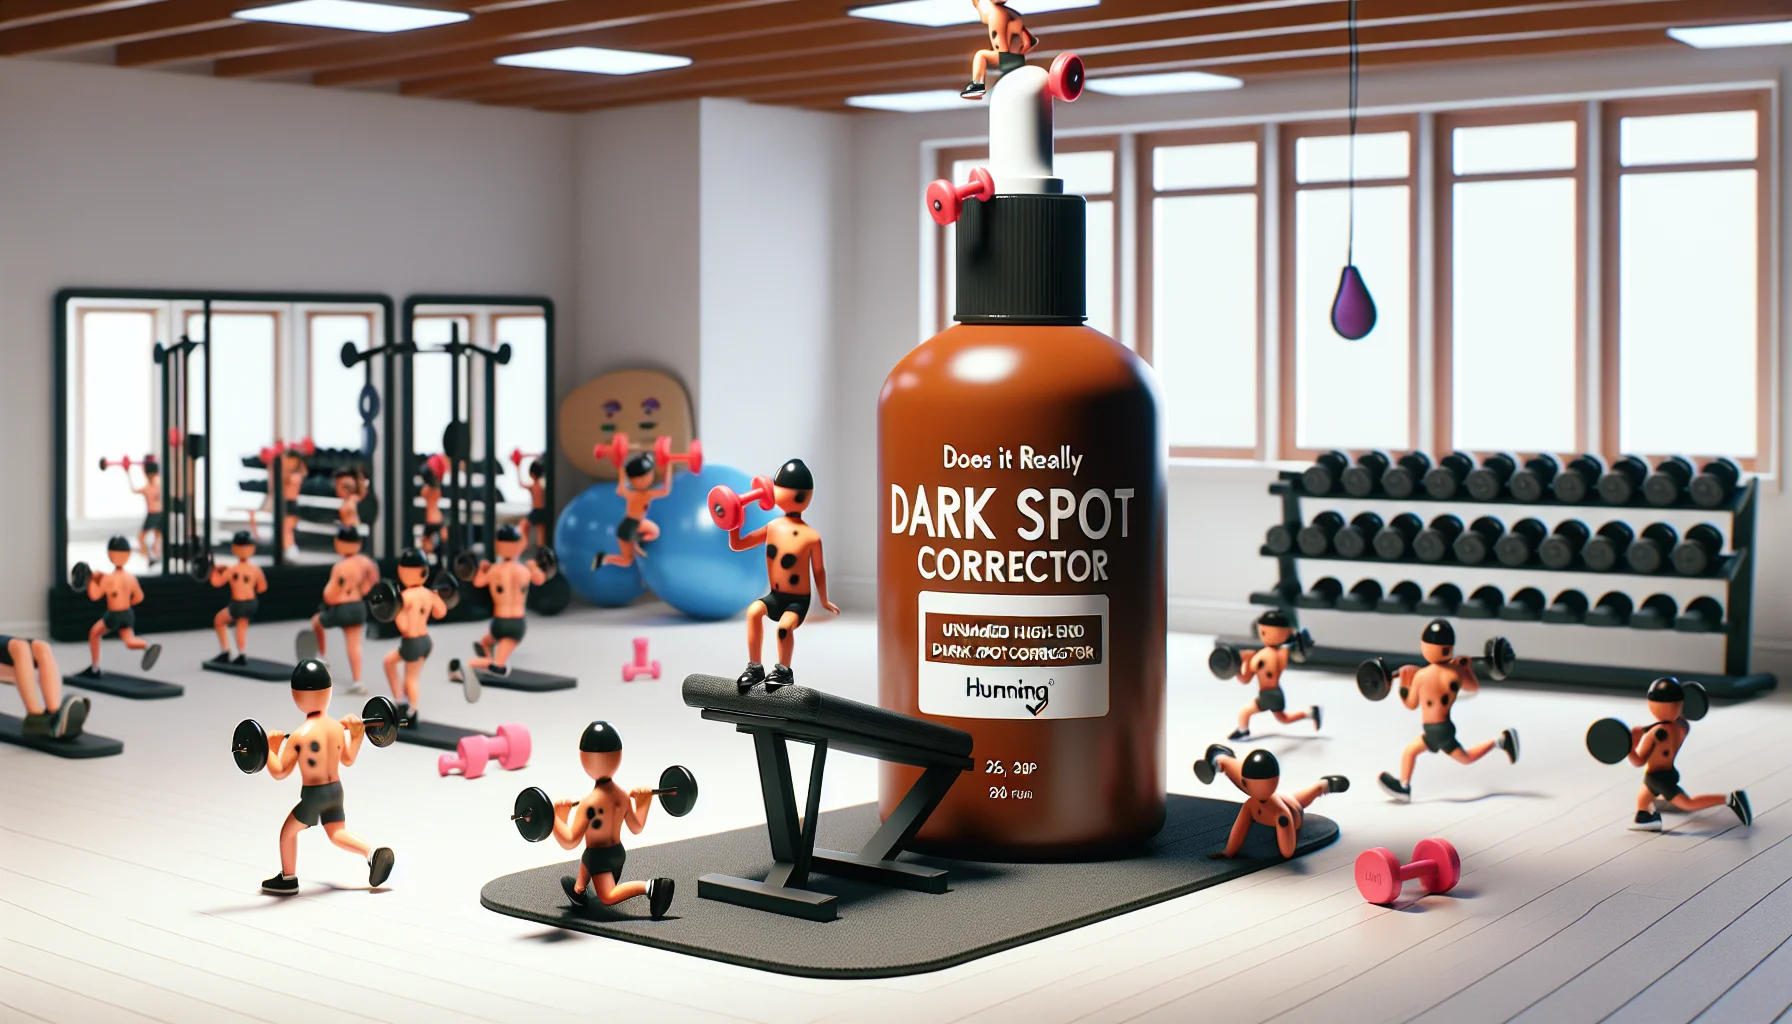 Create a humorous scenario showcasing an unnamed high-end dark spot corrector with the question 'Does It Really Work?' prominently displayed. Perhaps you could show animated bottles of the product participating in a fitness class - lifting miniature weights or running on tiny treadmills. The aim is to encourage people to exercise with a comical twist. Keep in mind that this should be a realistic setting, keeping the gym environment very detailed - mirrors, fitness equipment, gym mats, etc.